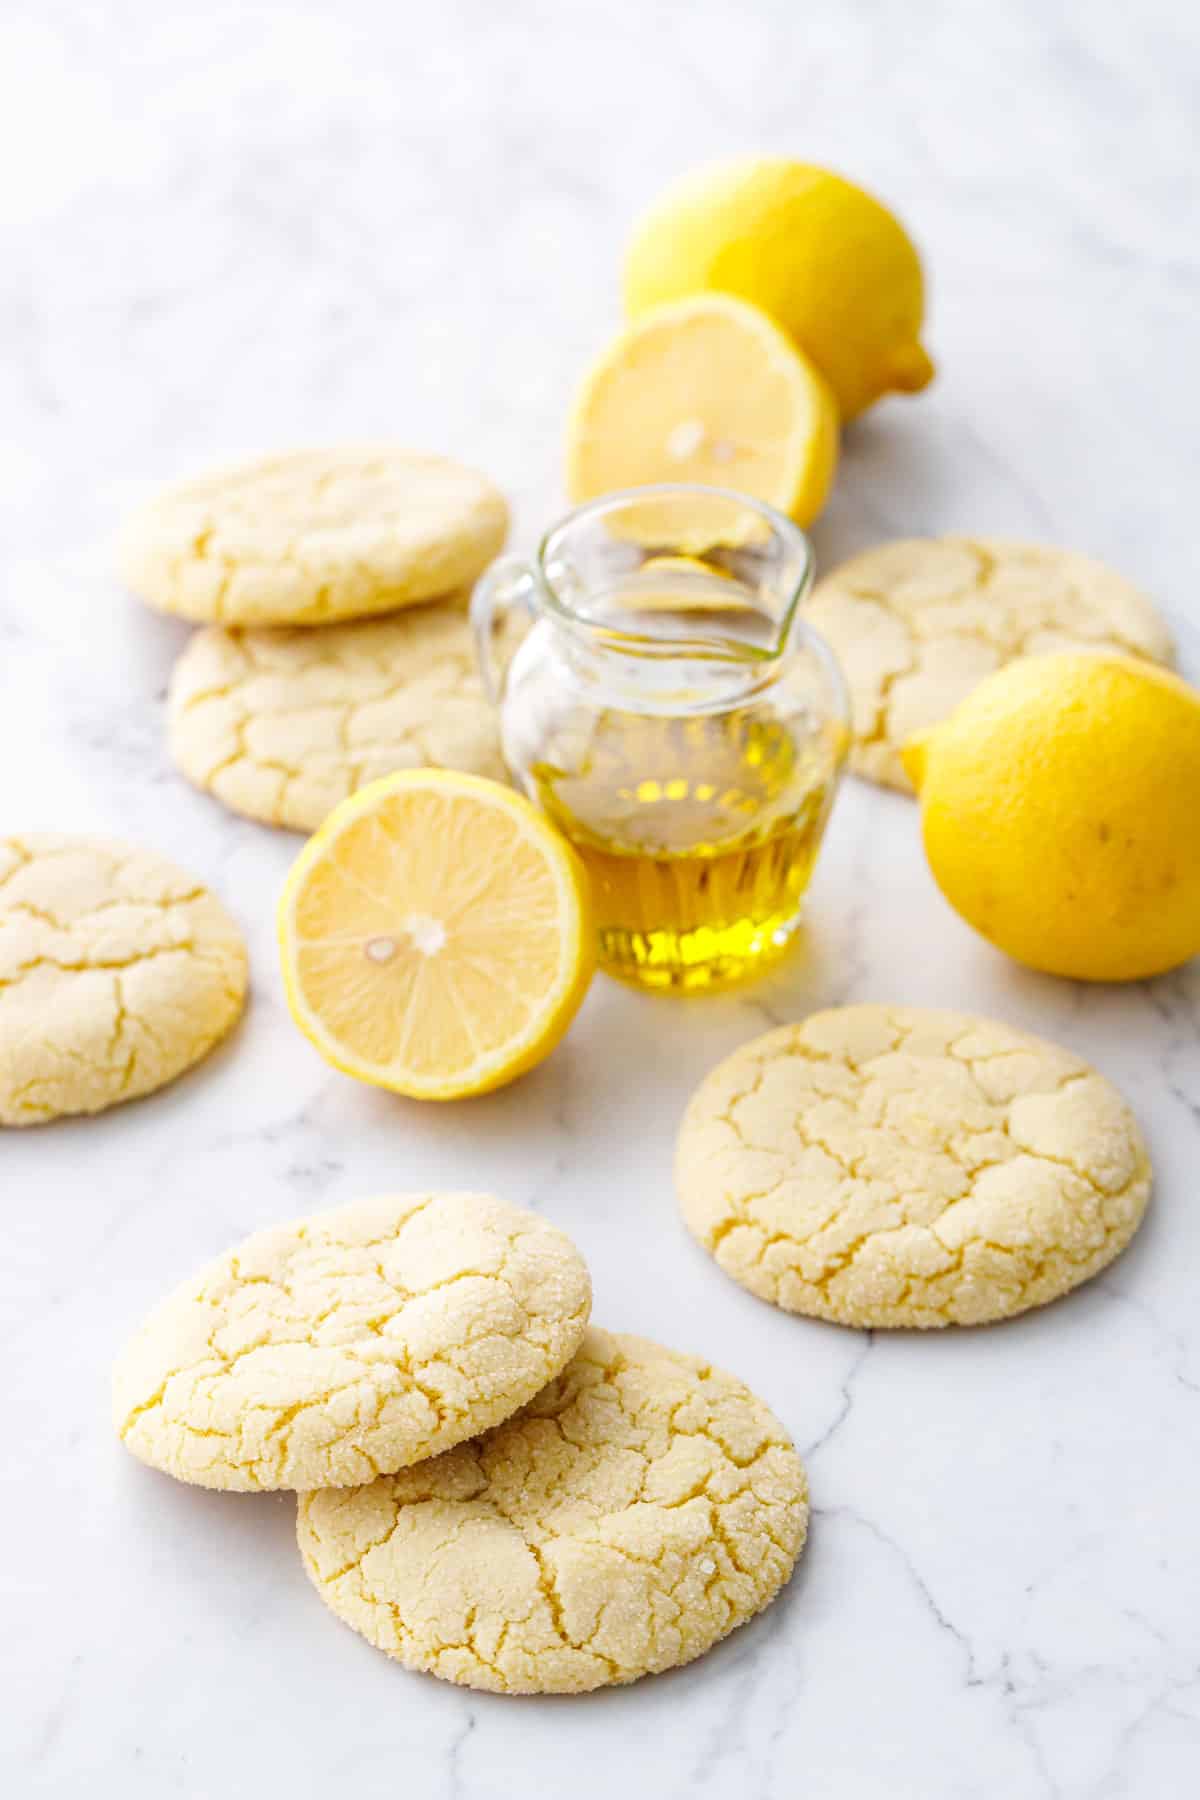 Lemon Olive Oil Sugar Cookies with crackly tops styled on a marble background with small glass pitcher of olive oil and whole and cut lemons.